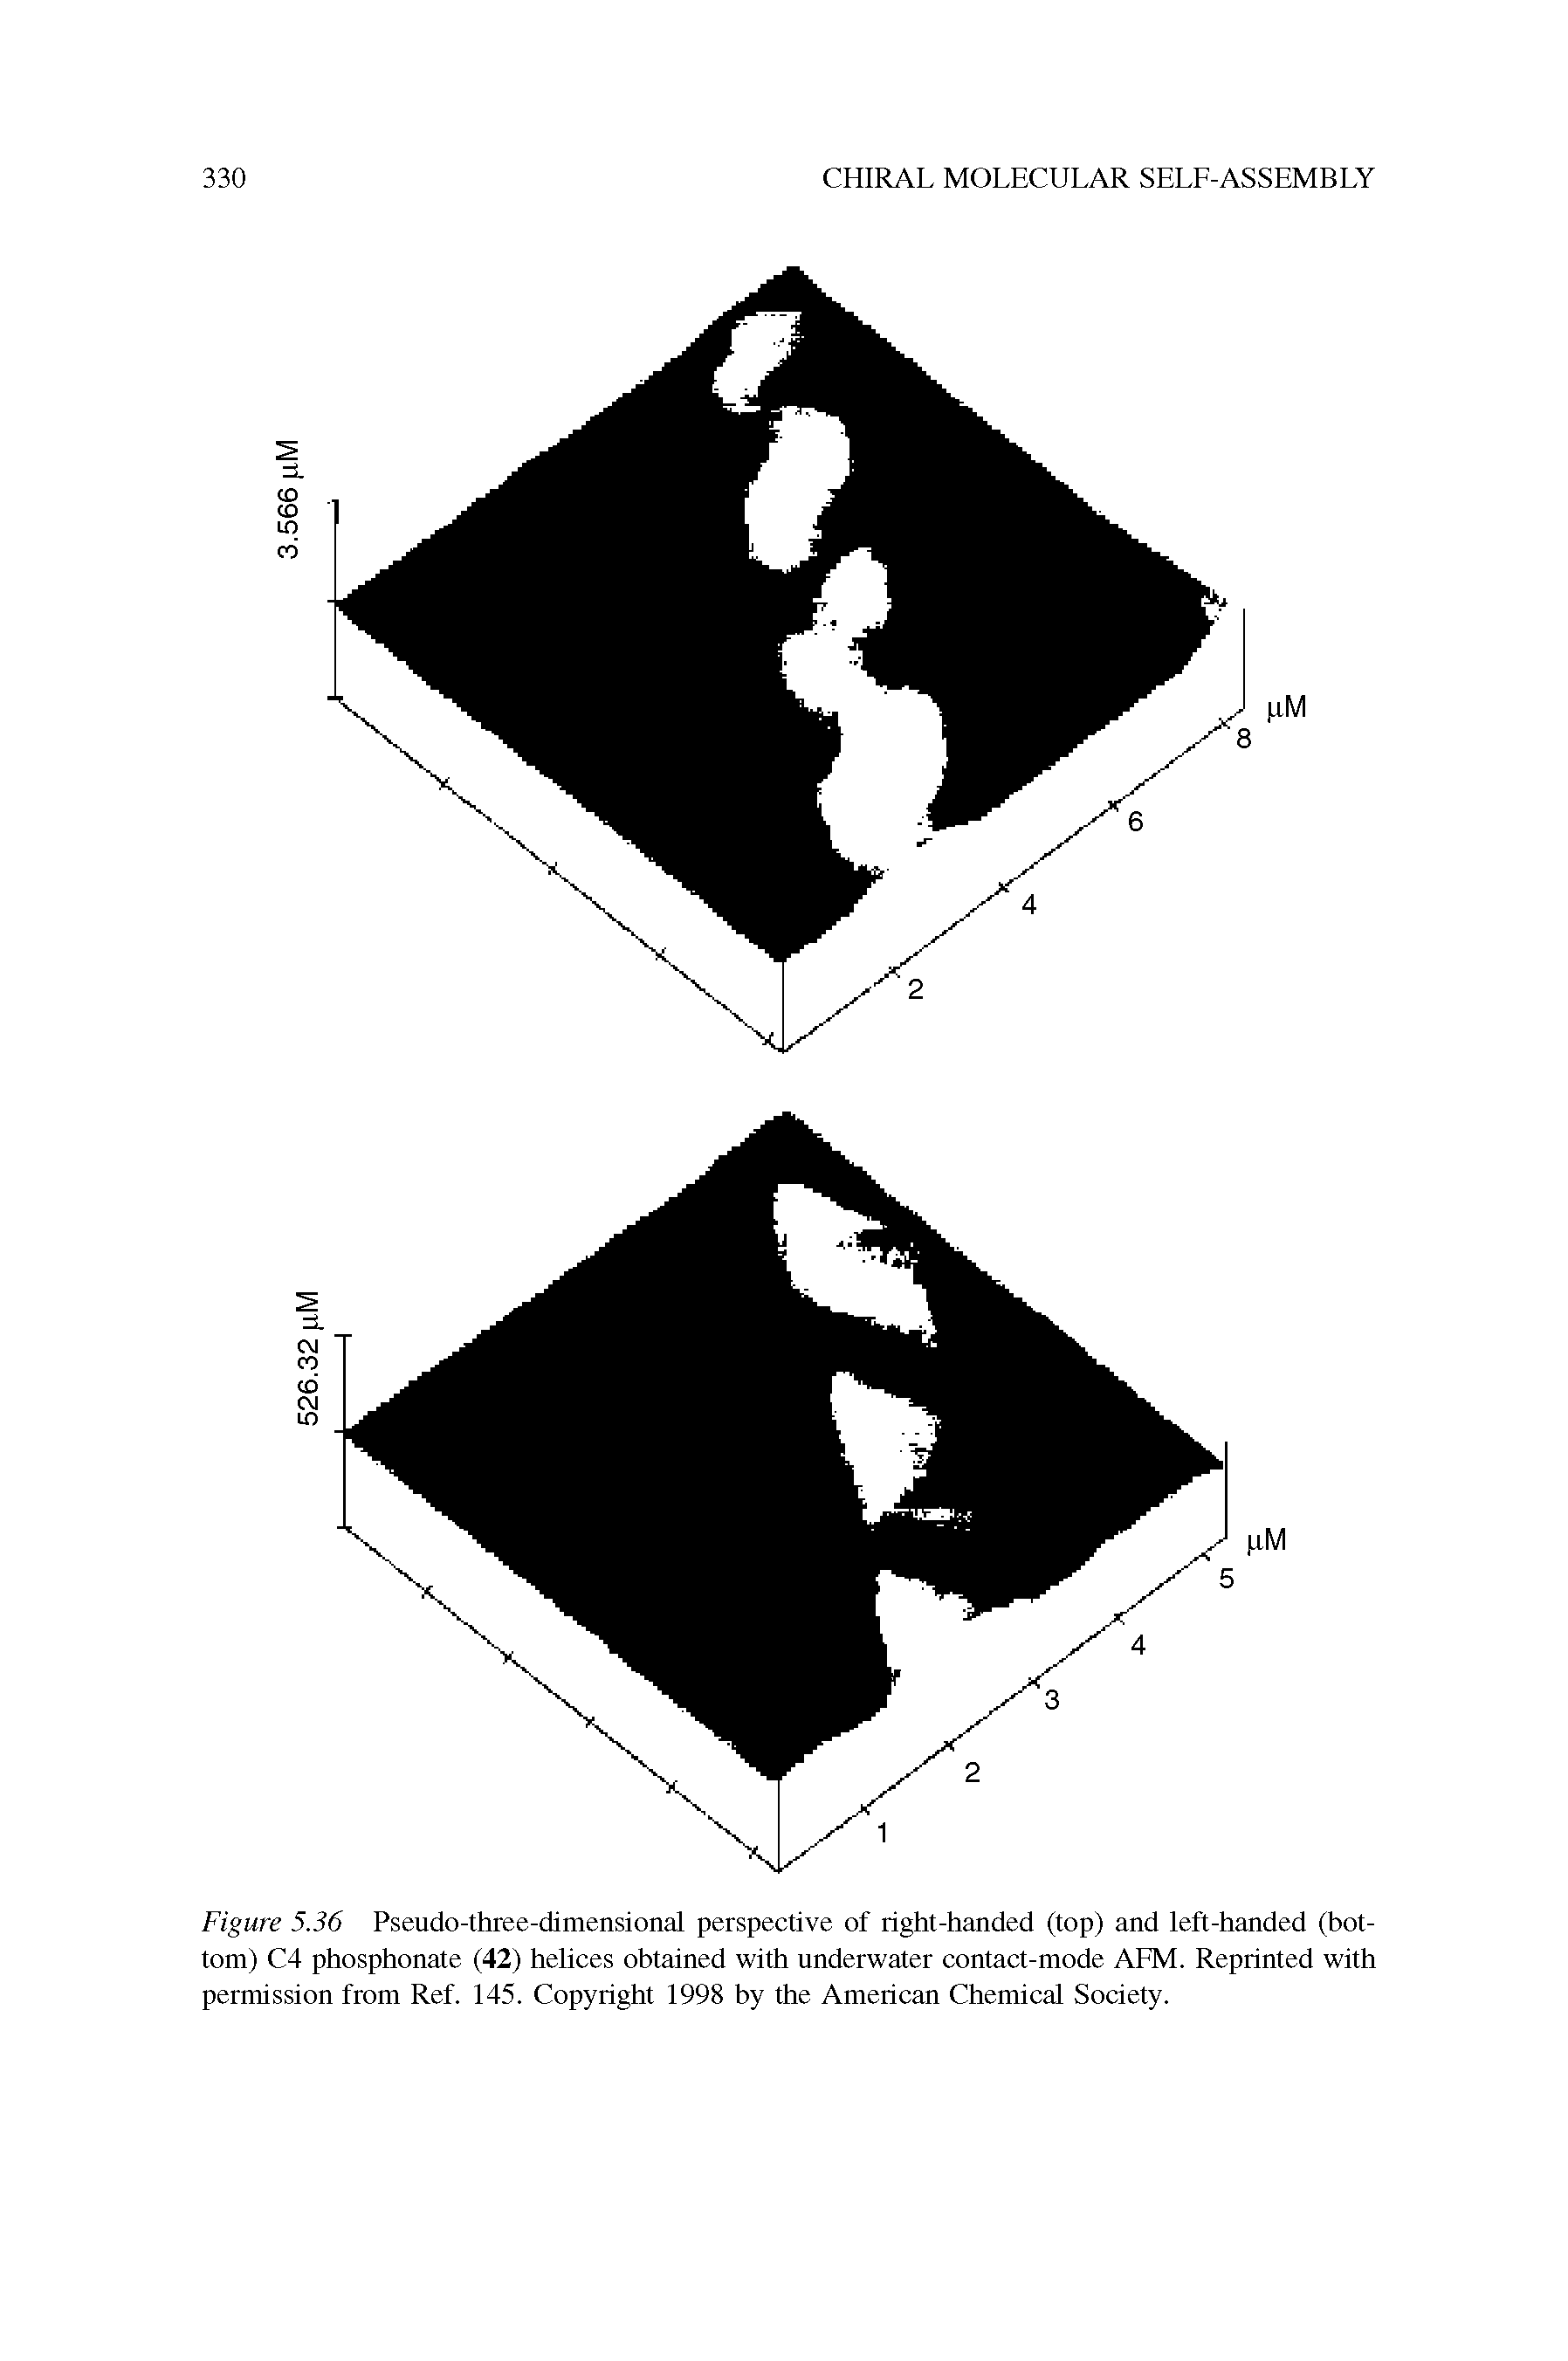 Figure 5.36 Pseudo-three-dimensional perspective of right-handed (top) and left-handed (bottom) C4 phosphonate (42) helices obtained with underwater contact-mode AFM. Reprinted with permission from Ref. 145. Copyright 1998 by the American Chemical Society.